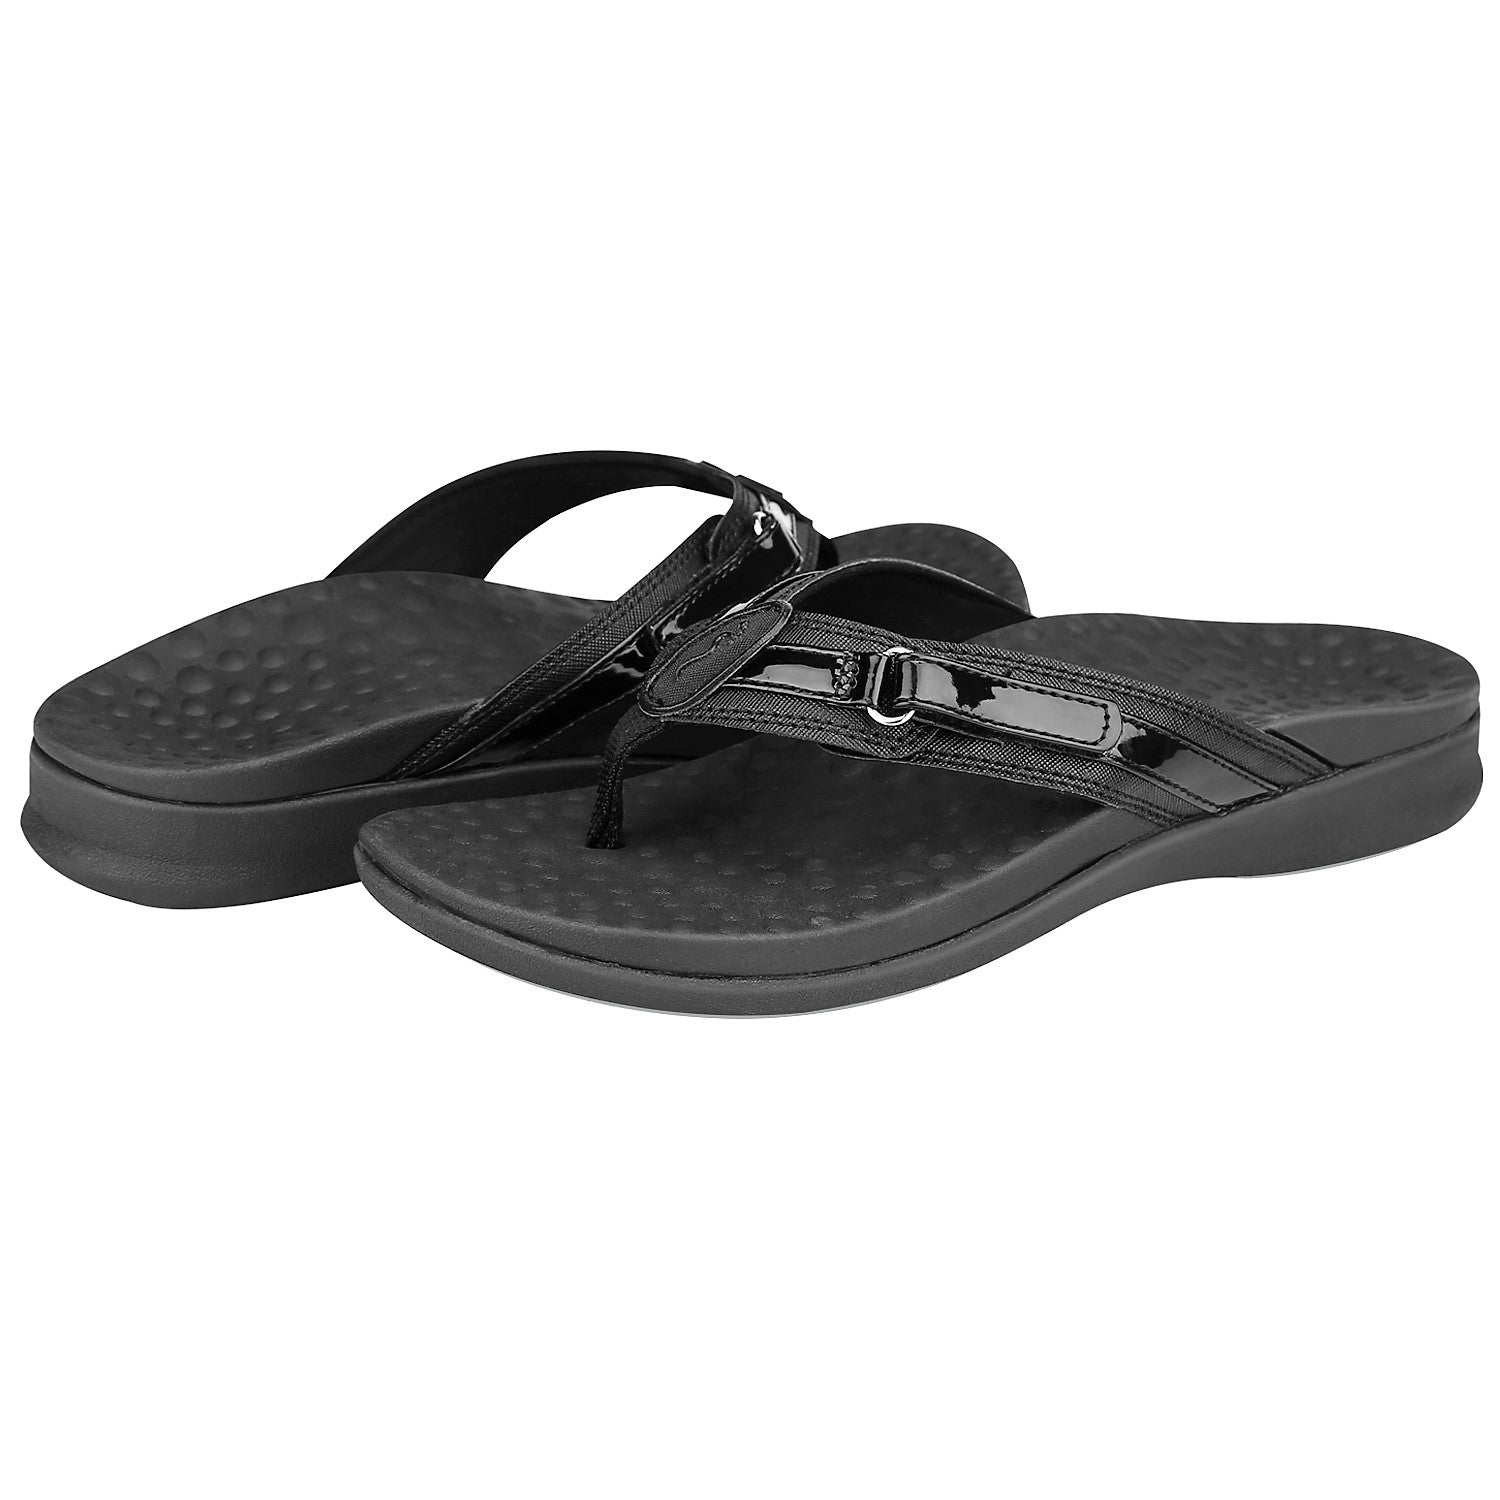 flip flops with metatarsal support